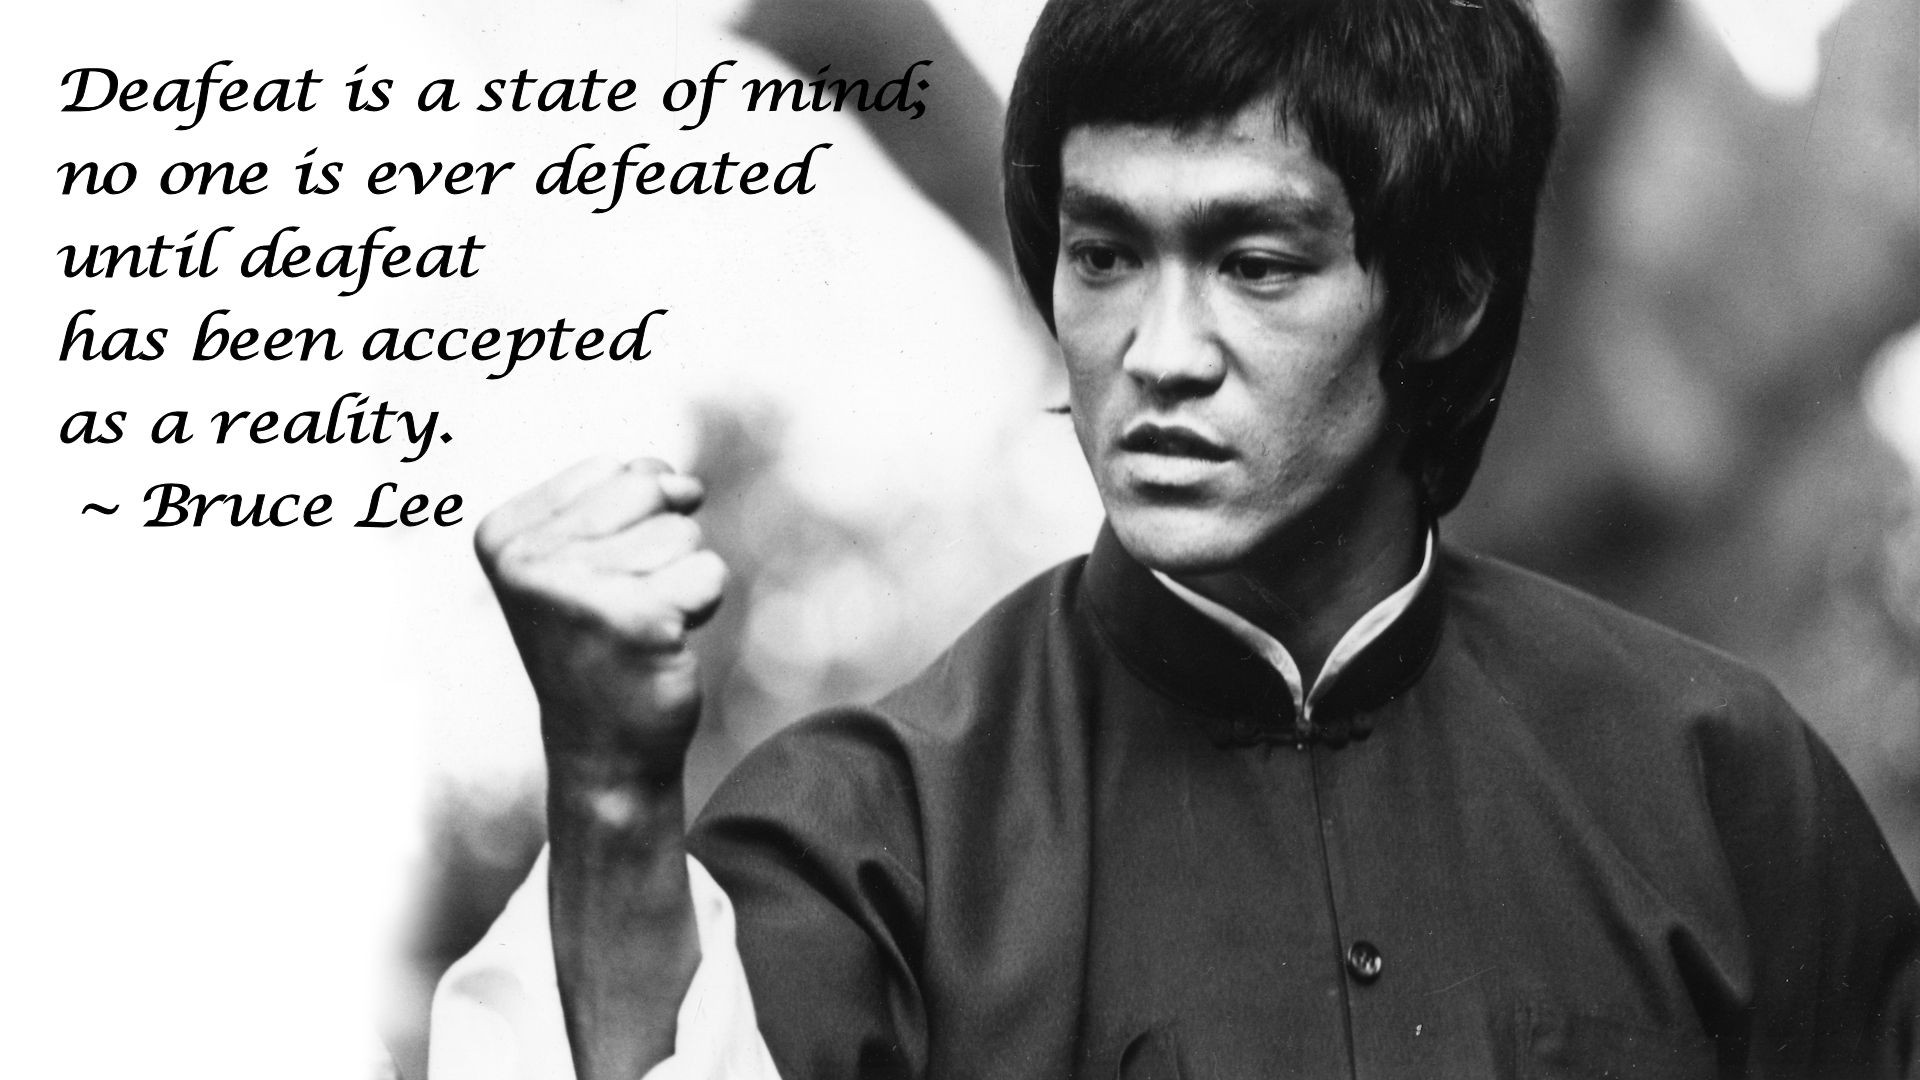 Bruce Lee BW Defeat martial art text quotes black white wallpaper 1920x1080